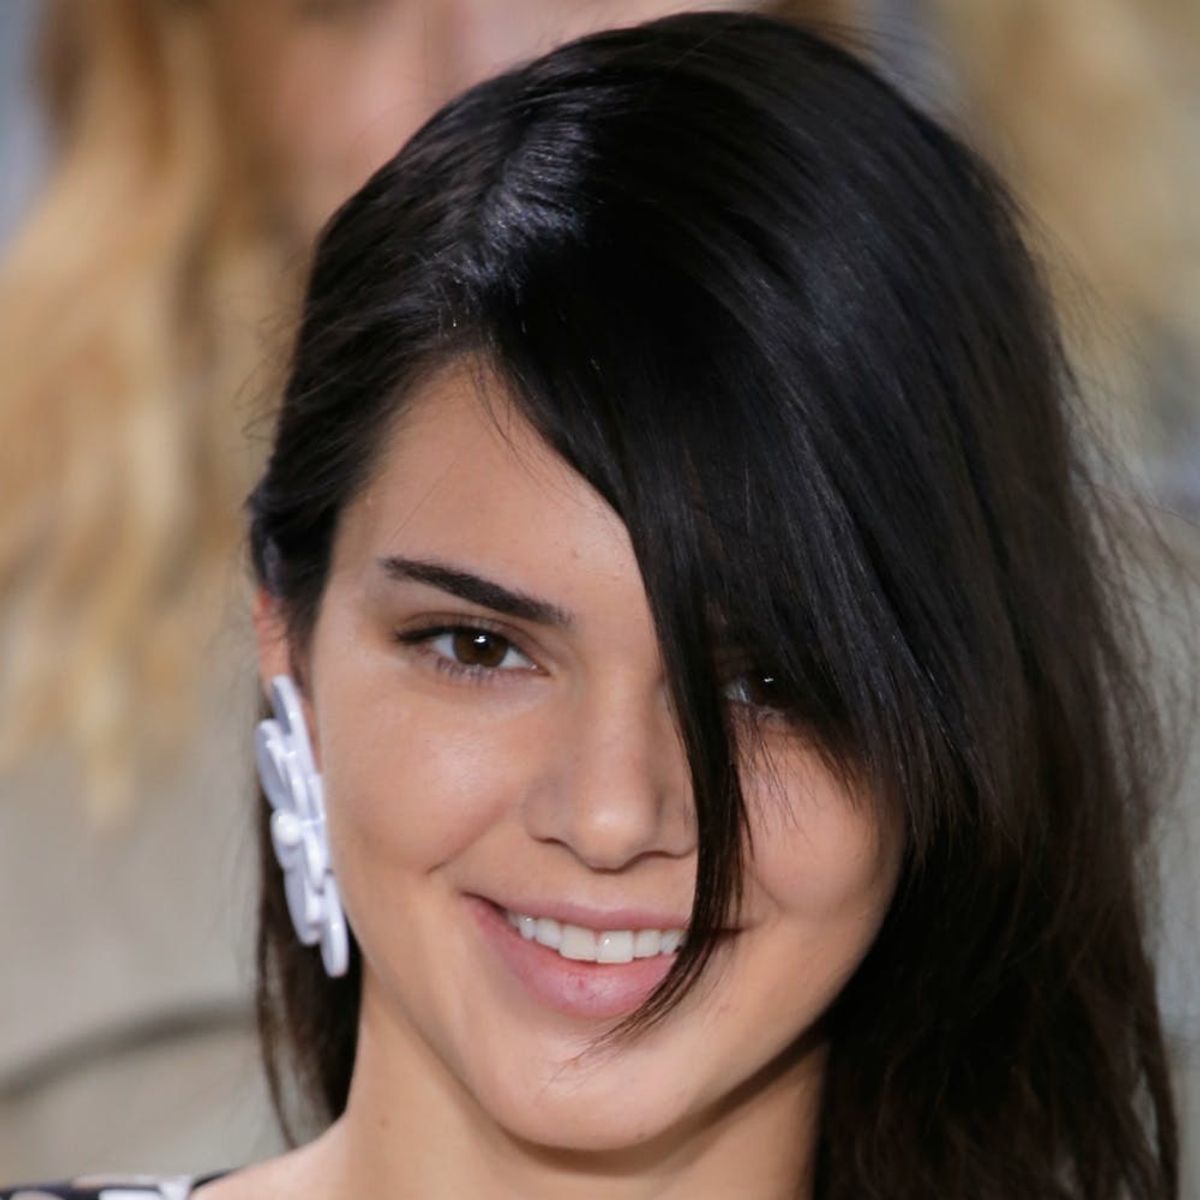 You Won’t Believe the Insane 21st Birthday Present Kendall Jenner Didn’t Remember Receiving